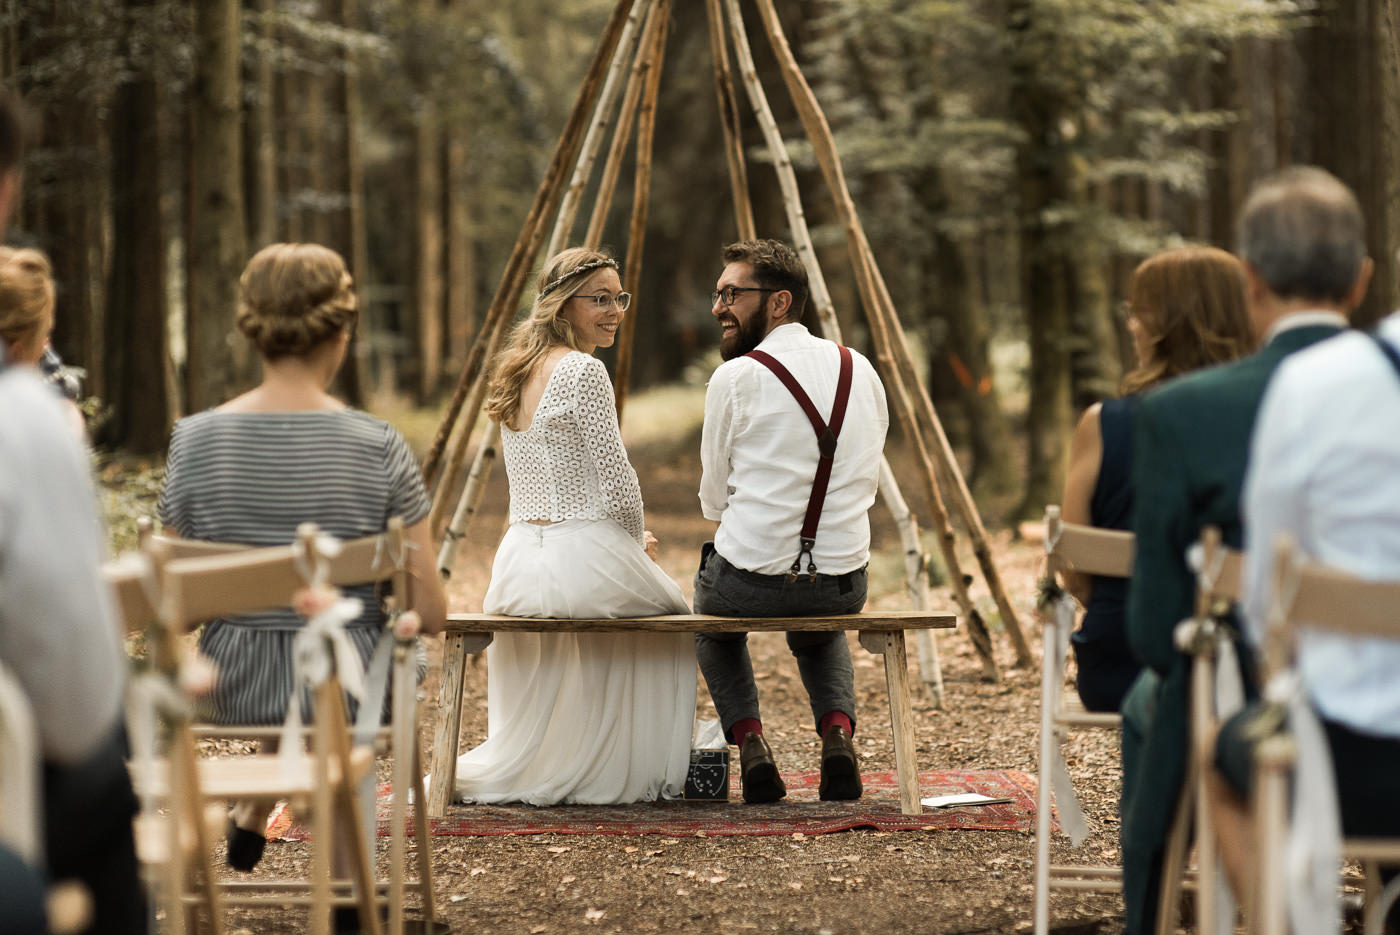 Wedding couple is laughing at their wedding guests during their forest wedding in nature